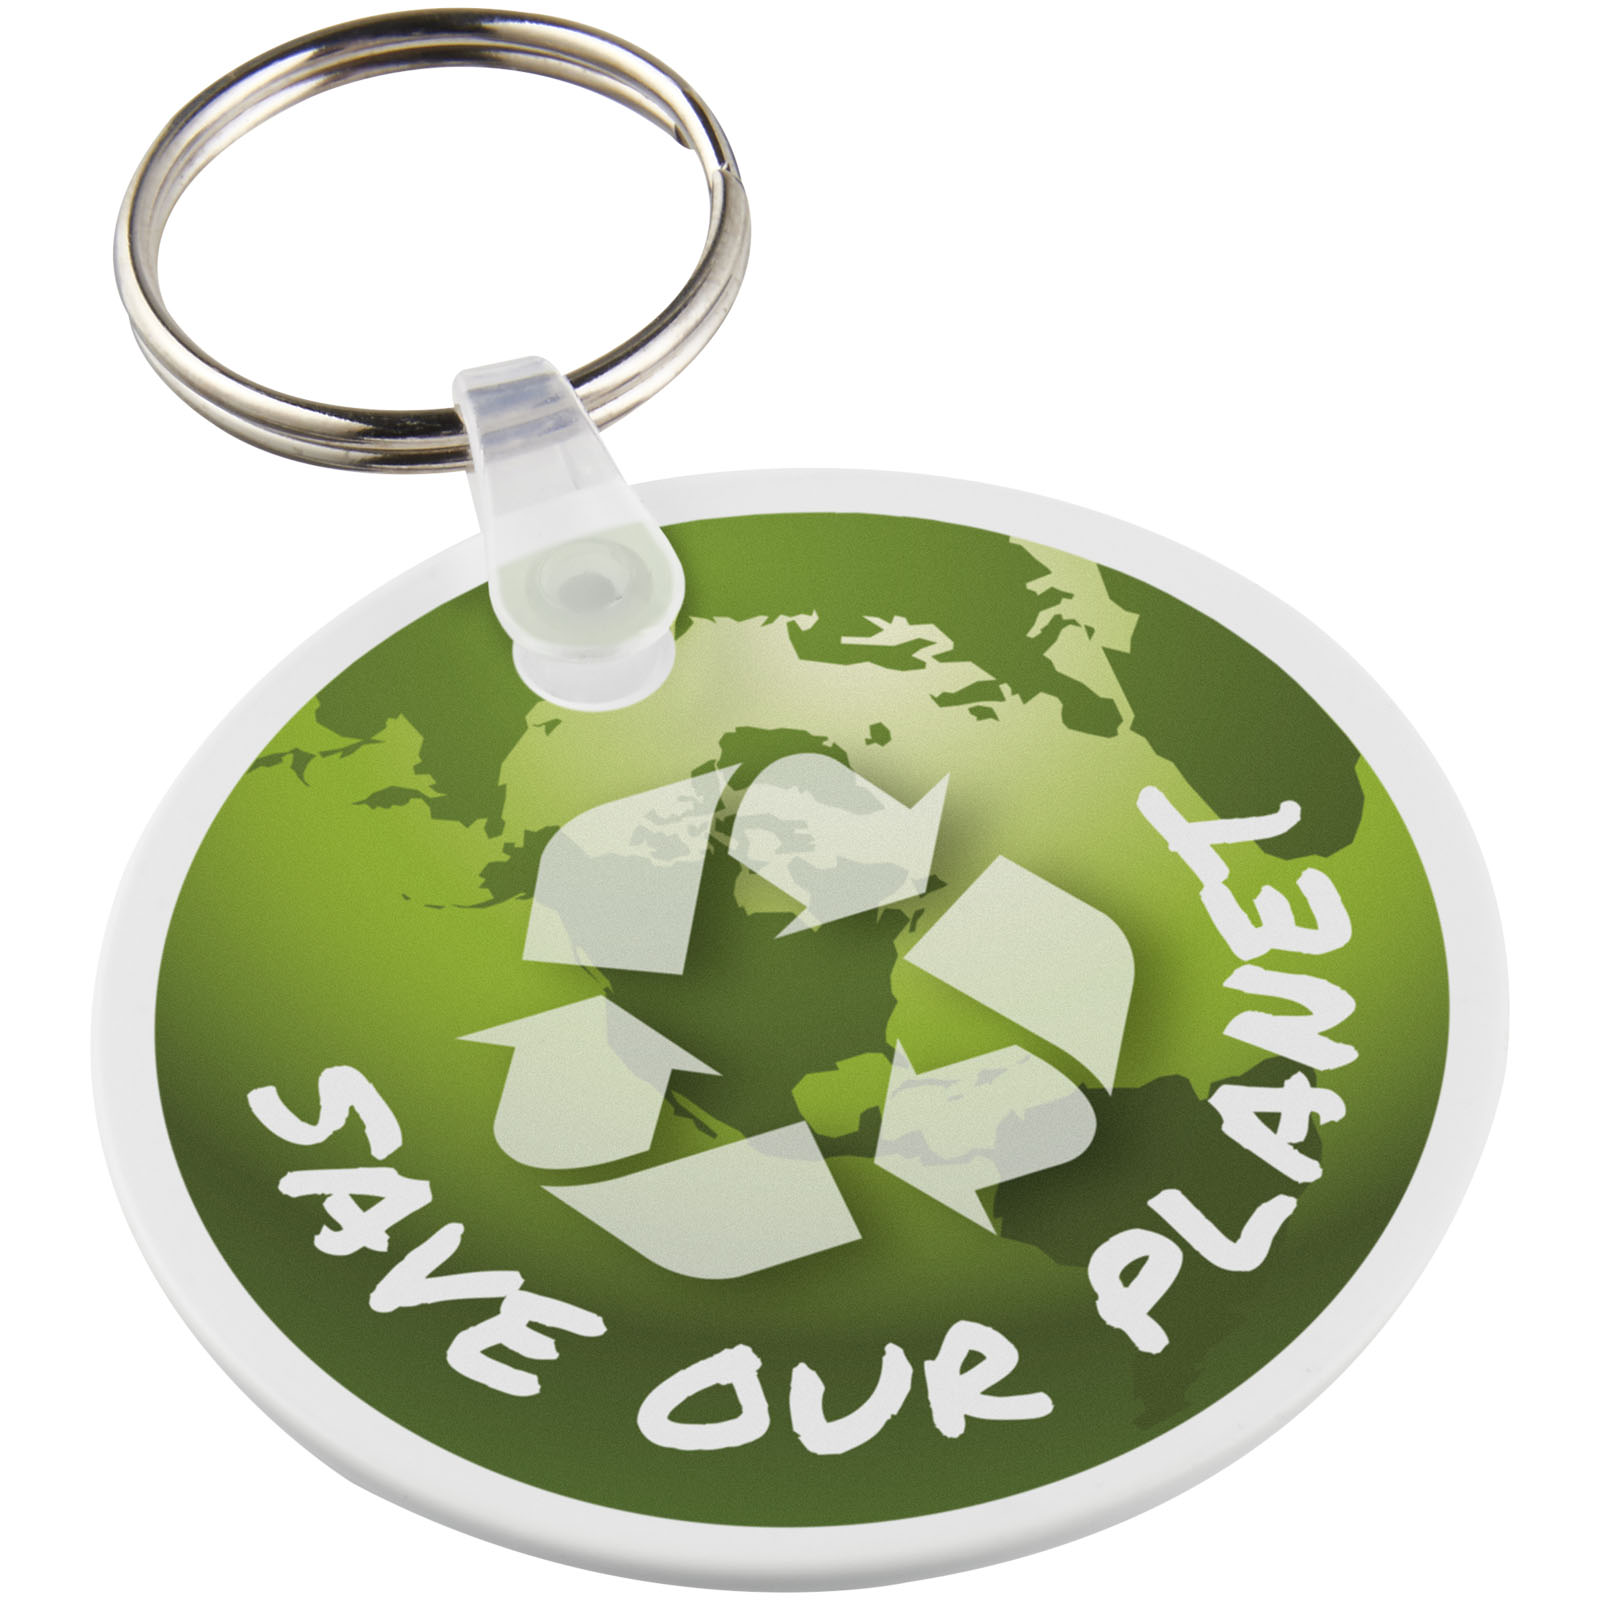 Advertising Keychains & Keyrings - Tait circle-shaped recycled keychain